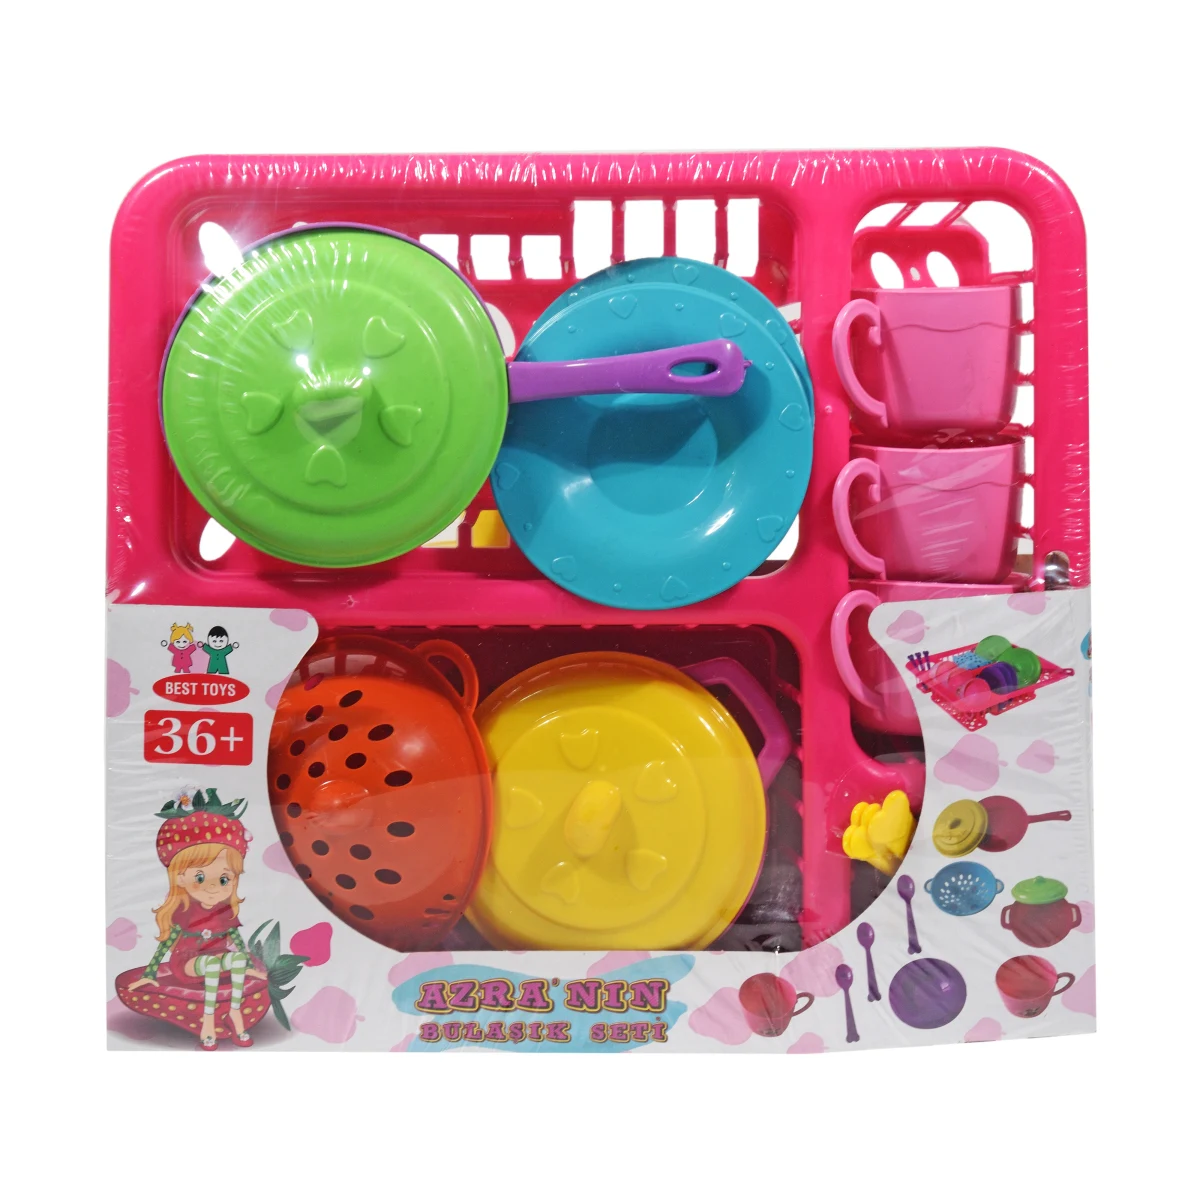 Kitchen Set With Dish Basket Toy Set Made In Turkey Manucafturer Educational Creative Pretend Play Role Play Set  Trend PP Sale (11000002783975)